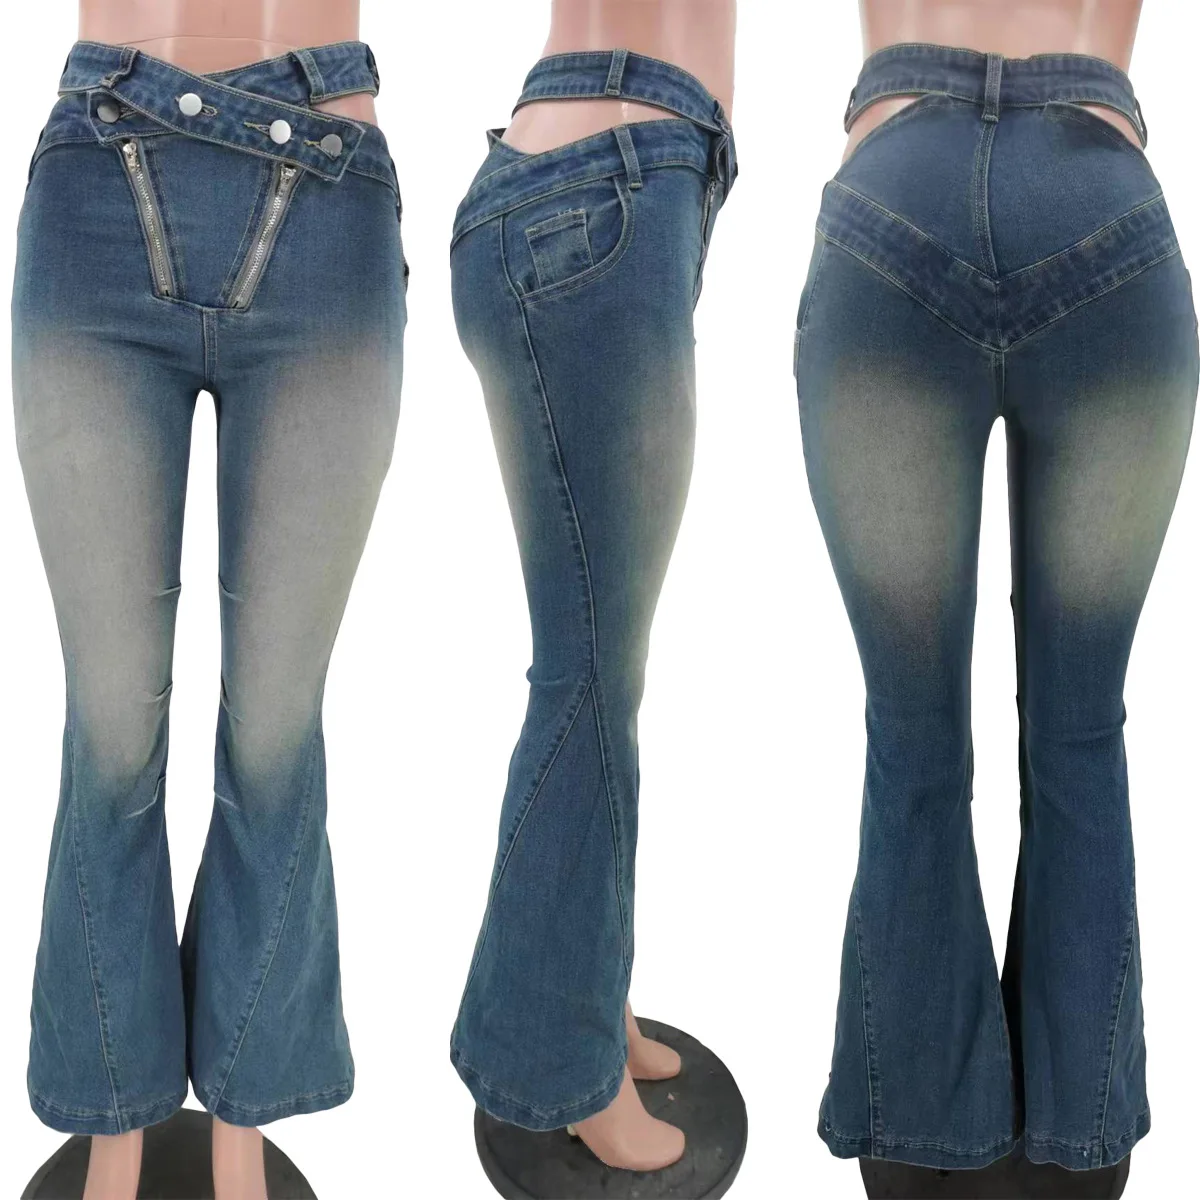 New Trendy Women's Jeans Casual Stretch Hollow Out Zipper Slim Fit ...